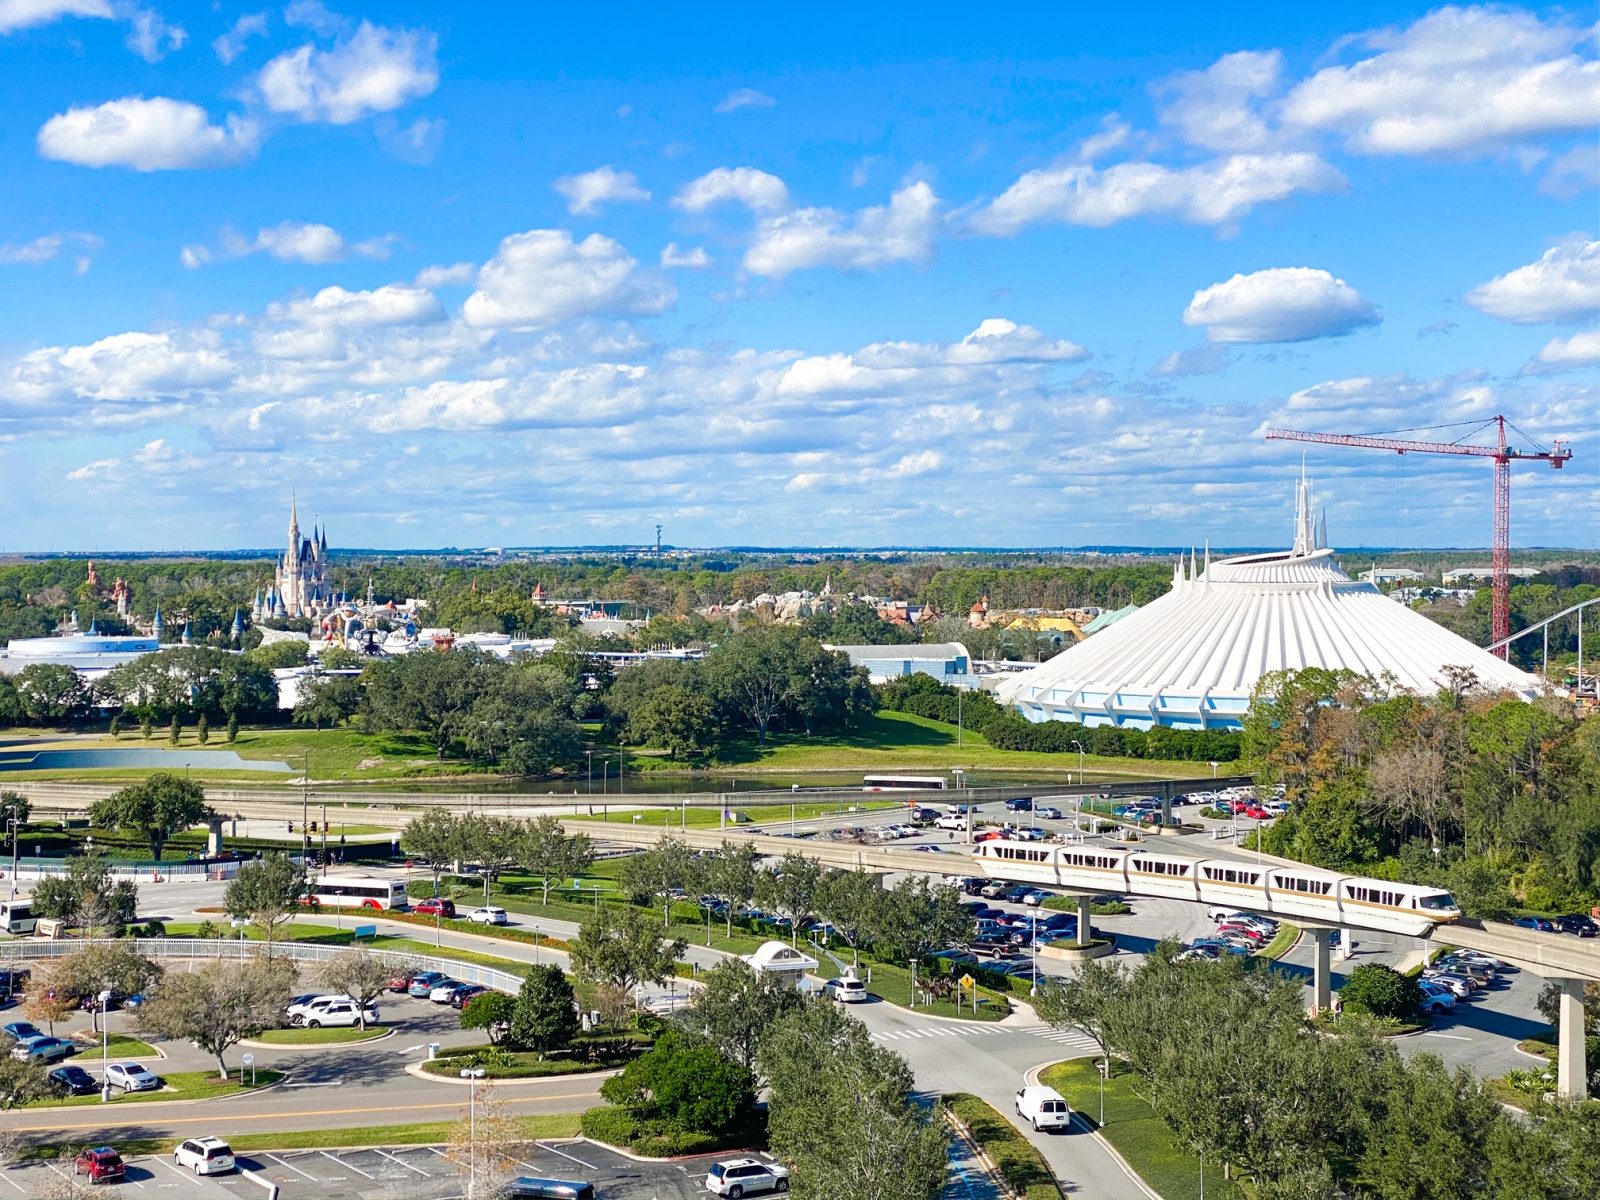 Disney Monorail Hotels view from Contemporary Resort where you can see the disney parks